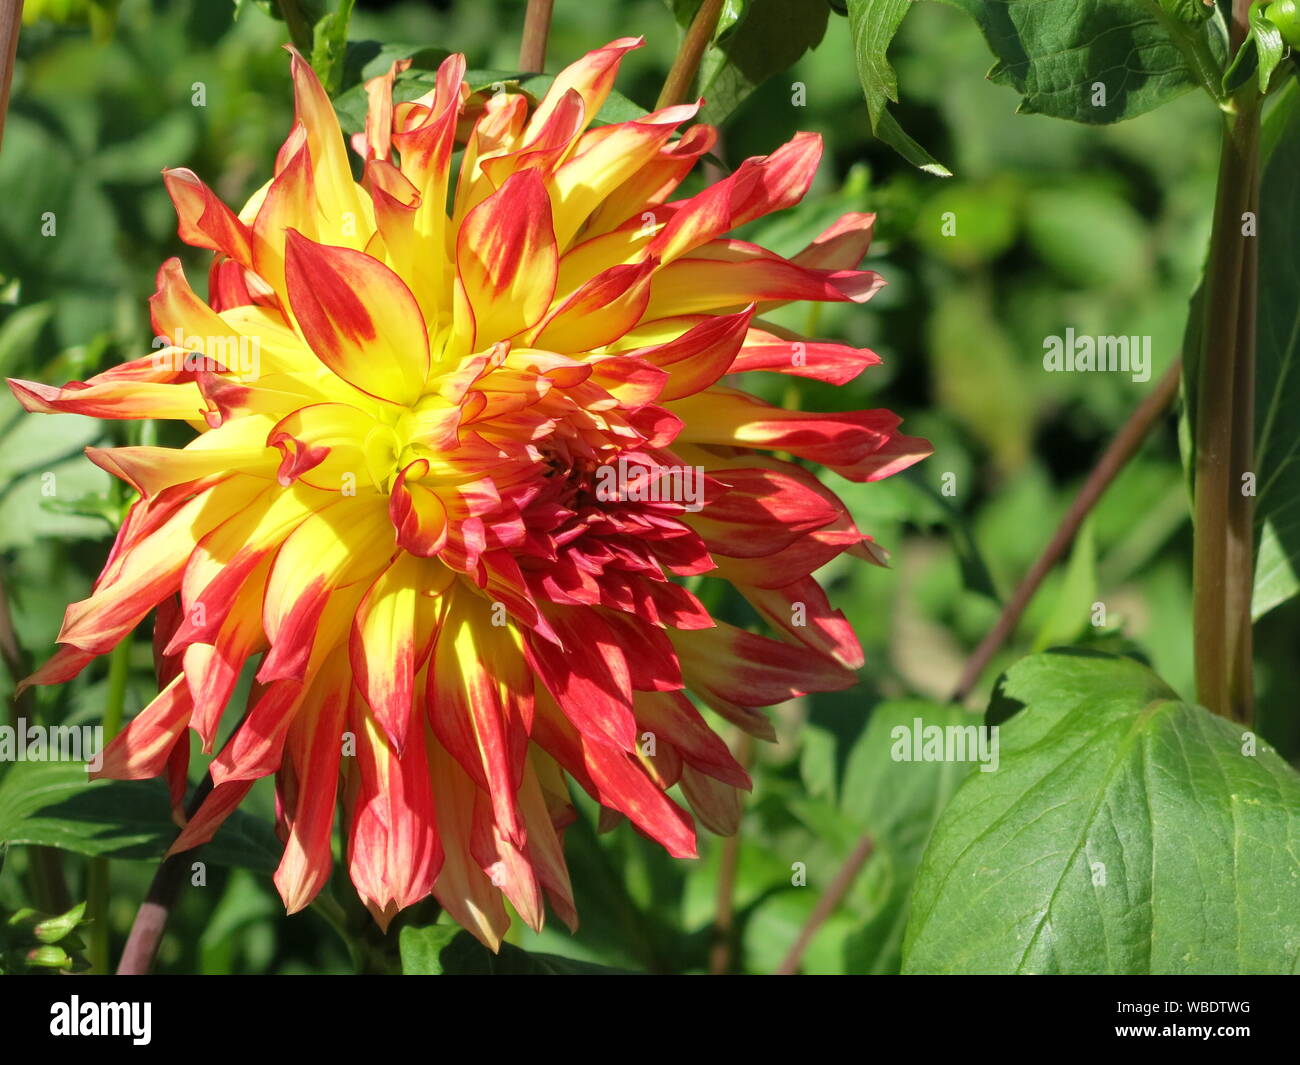 A shaggy-type dahlia flower, yellow with crimson red towards the end of the petals. Stock Photo